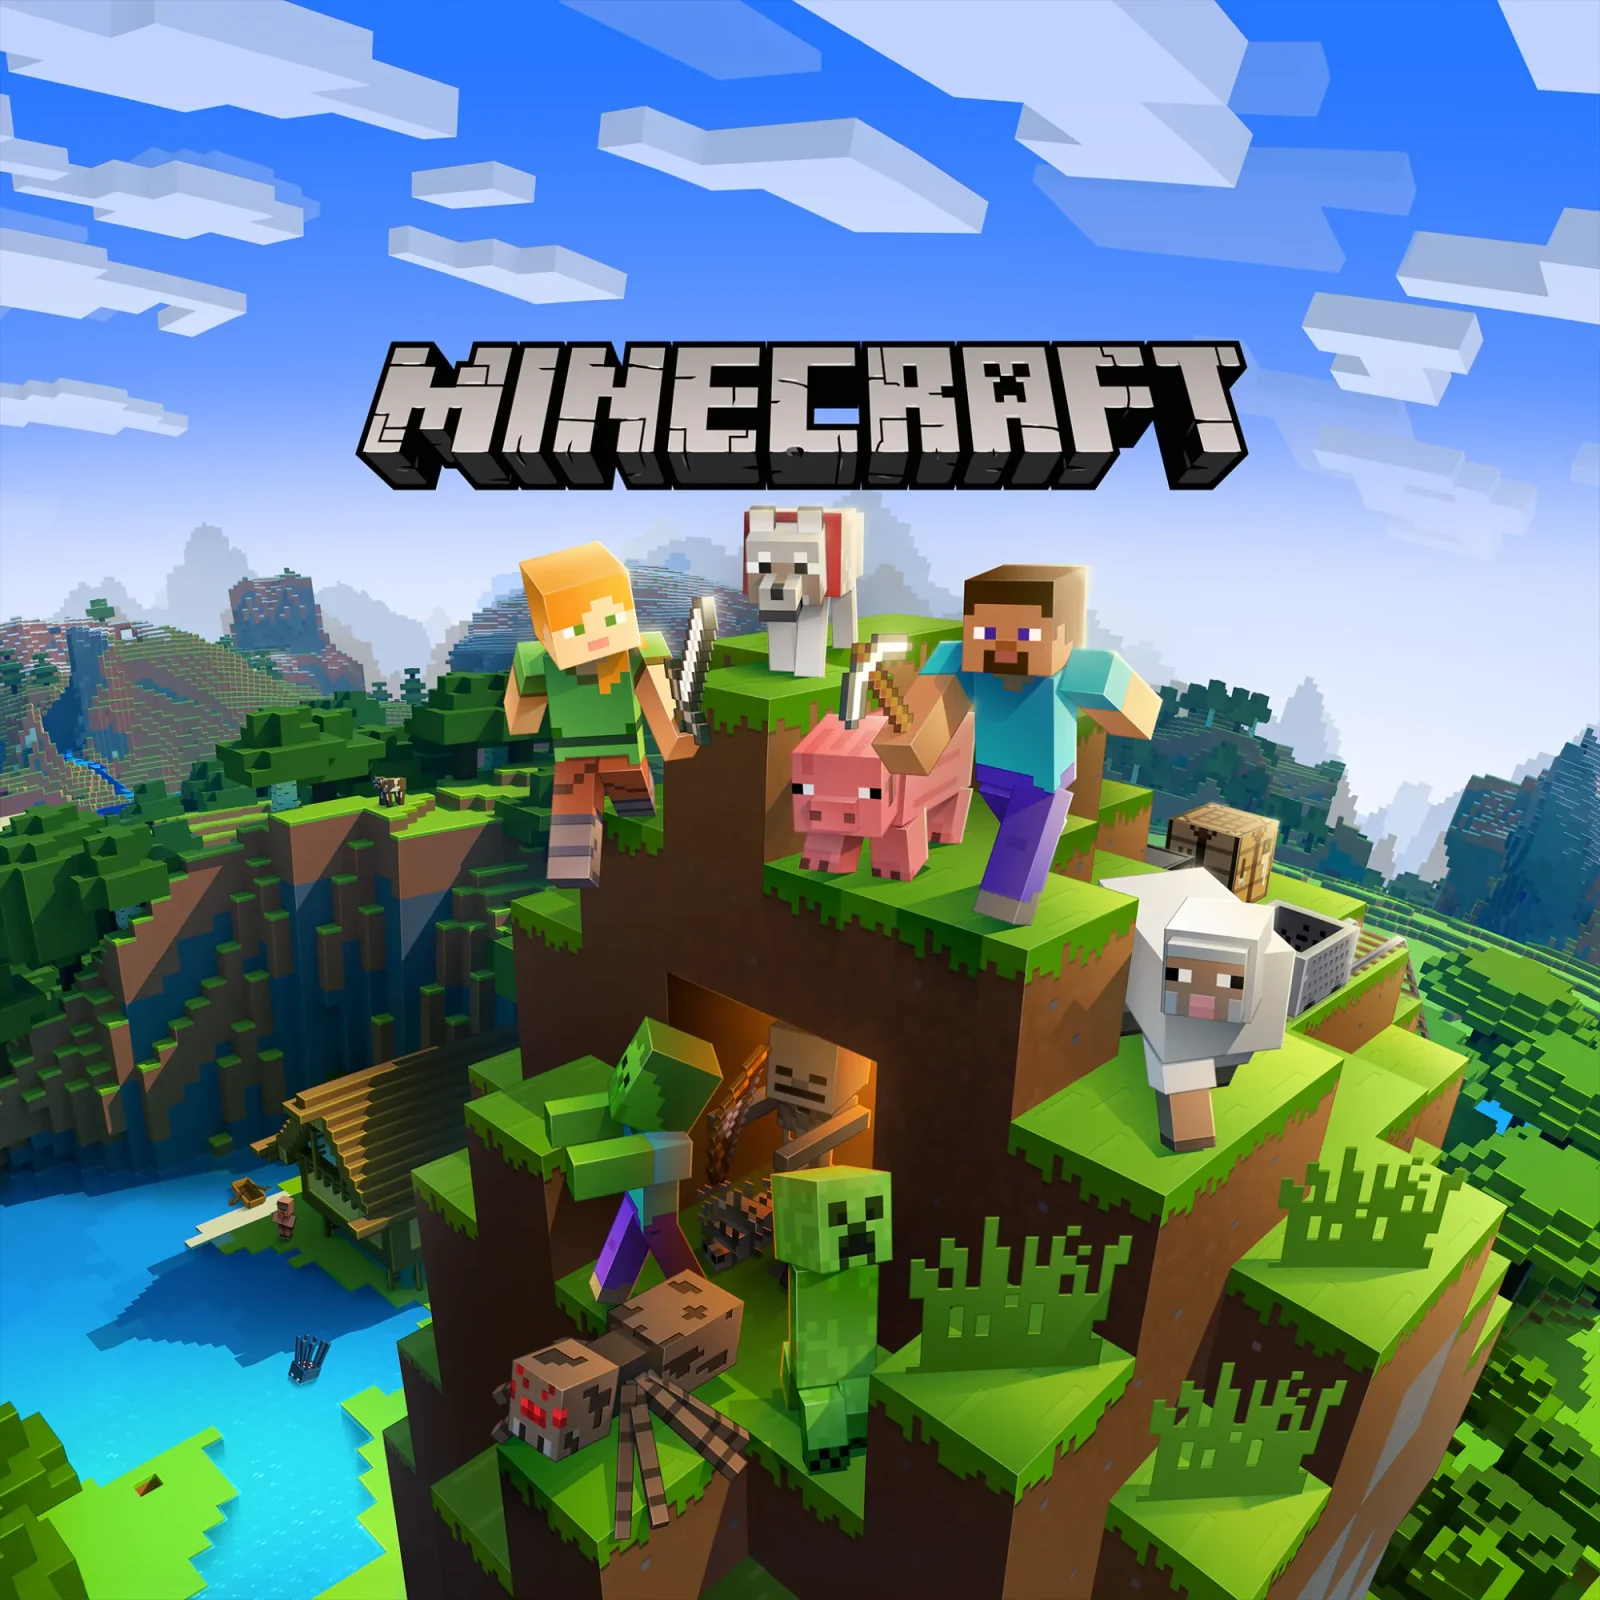 Minecraft PC Buying Guide: Top Picks for Budget, Mid-Range, and High-End Gamers